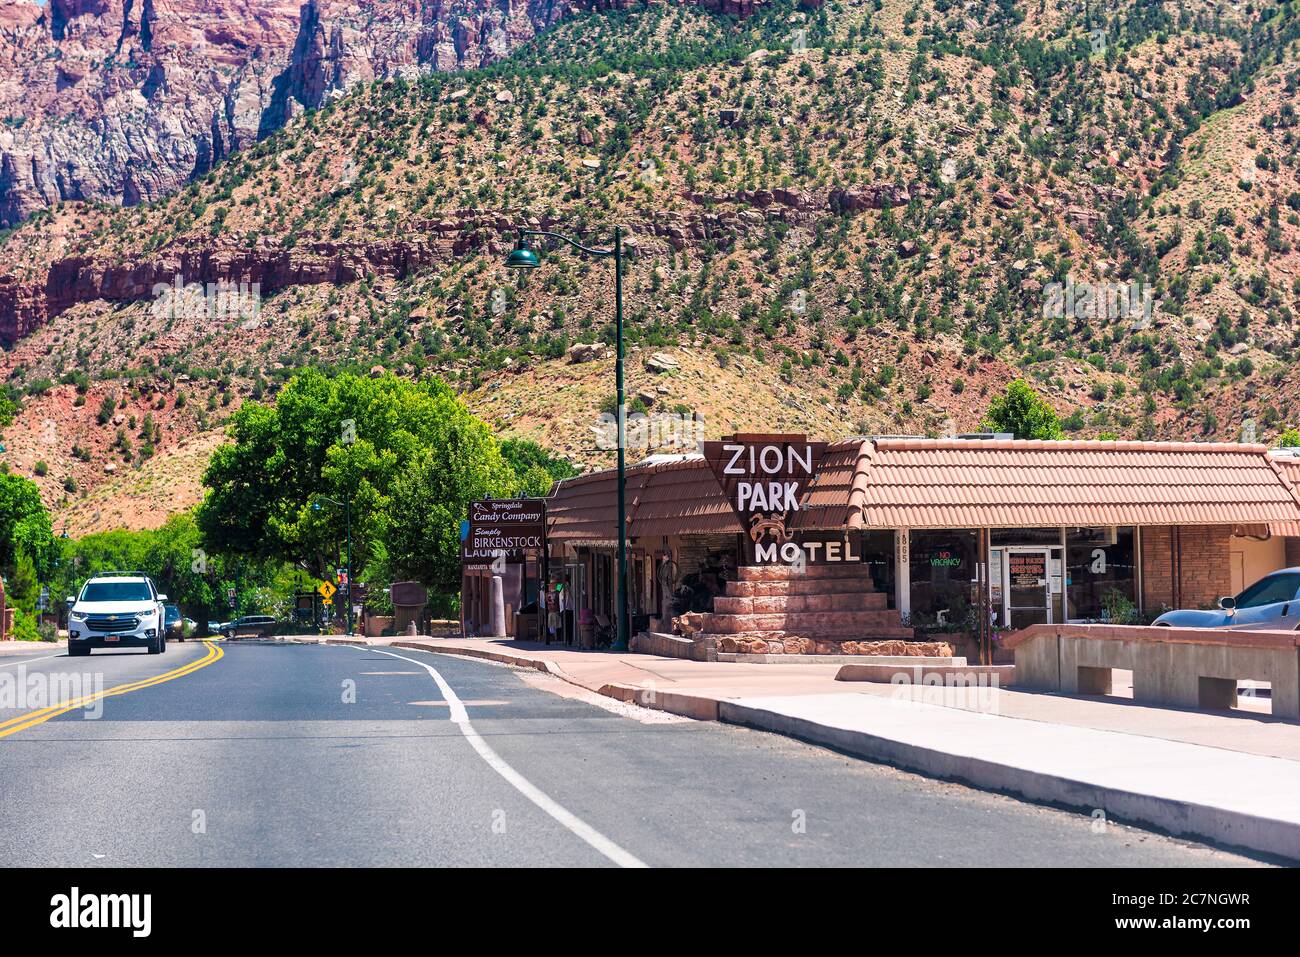 Springdale, USA - August 5, 2019: Zion National Park road street in Utah and town city sign for motel hotel lodging accommodation Stock Photo